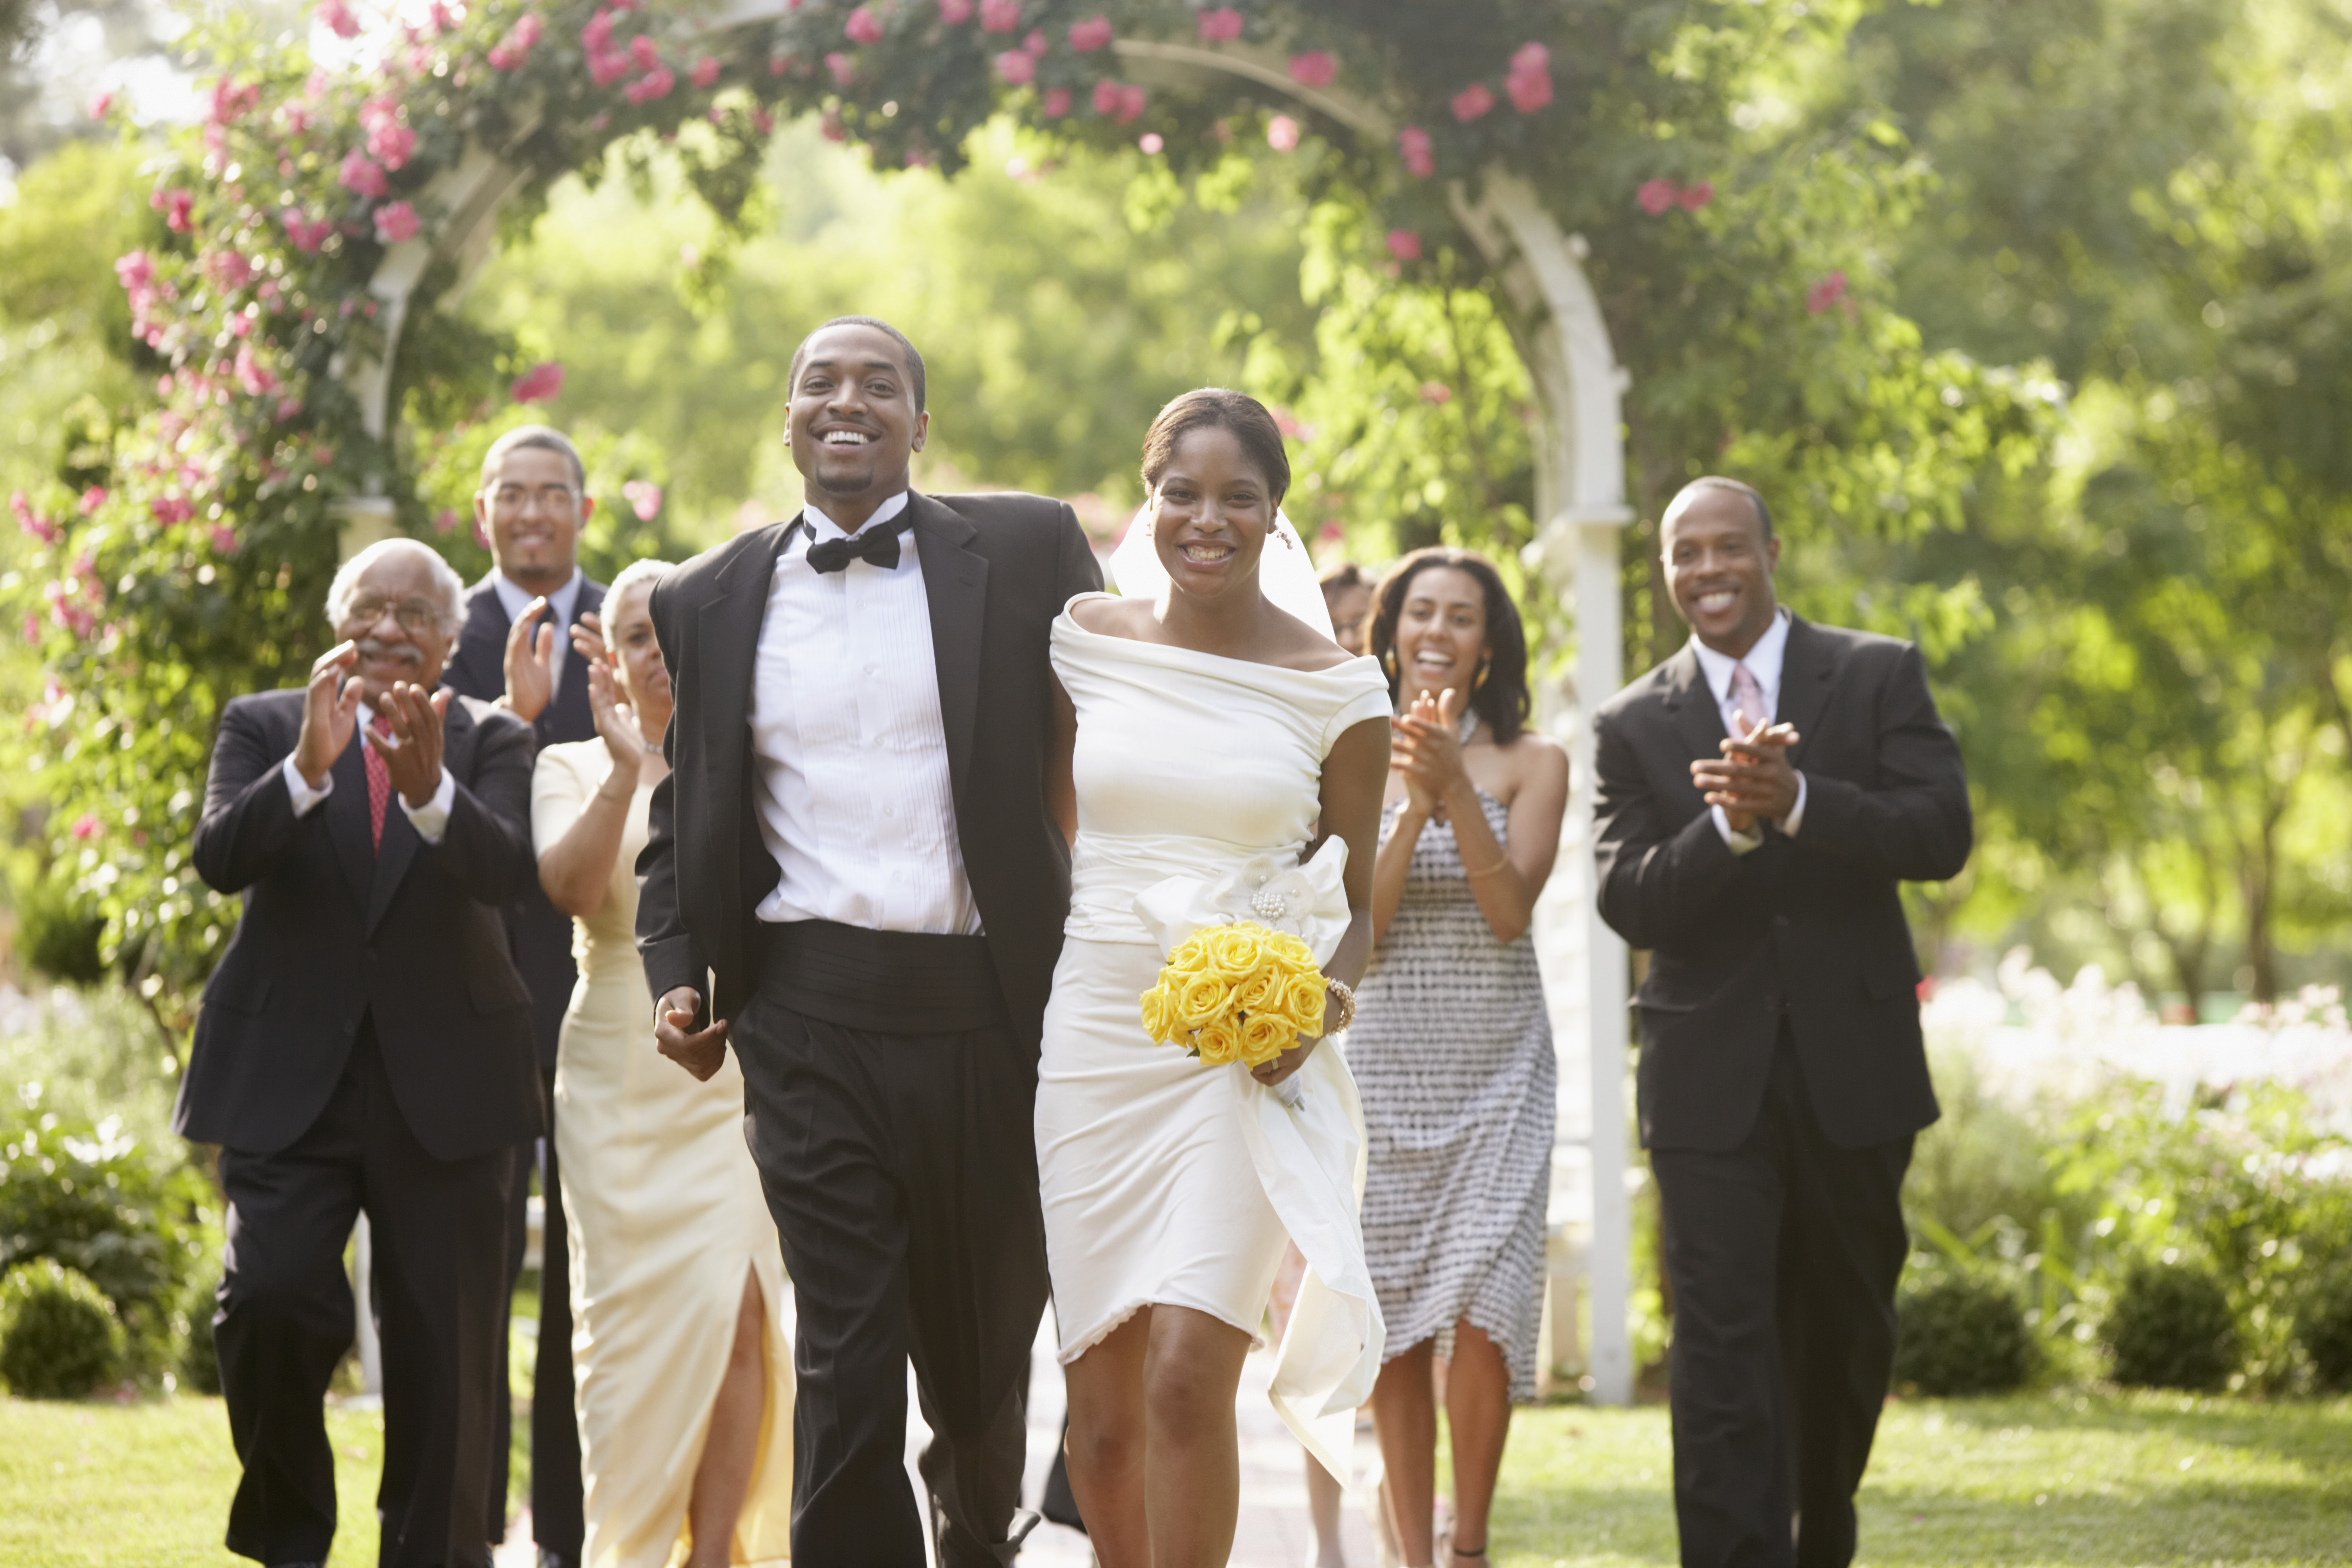 Wedding guests applauding newlyweds | Source: Getty Images